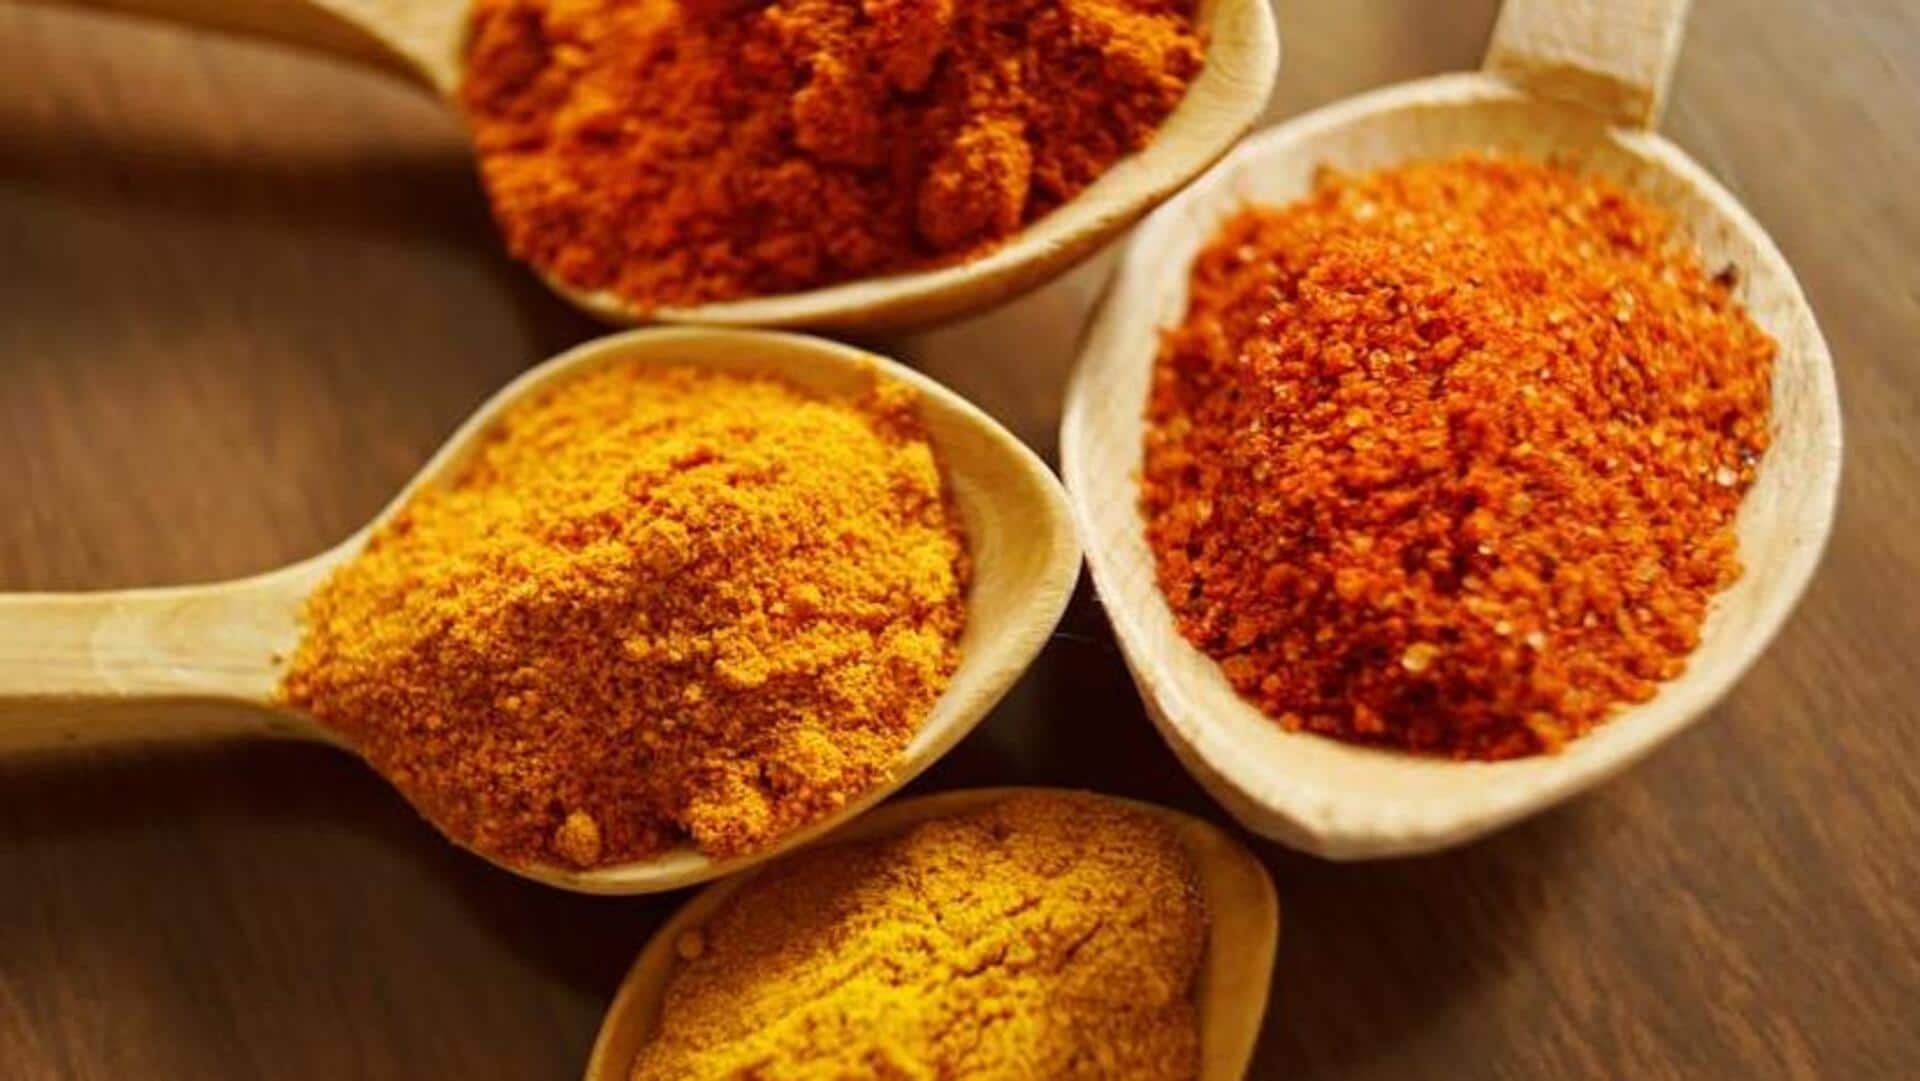 Spice blends that give Rajasthani dishes their distinctive taste